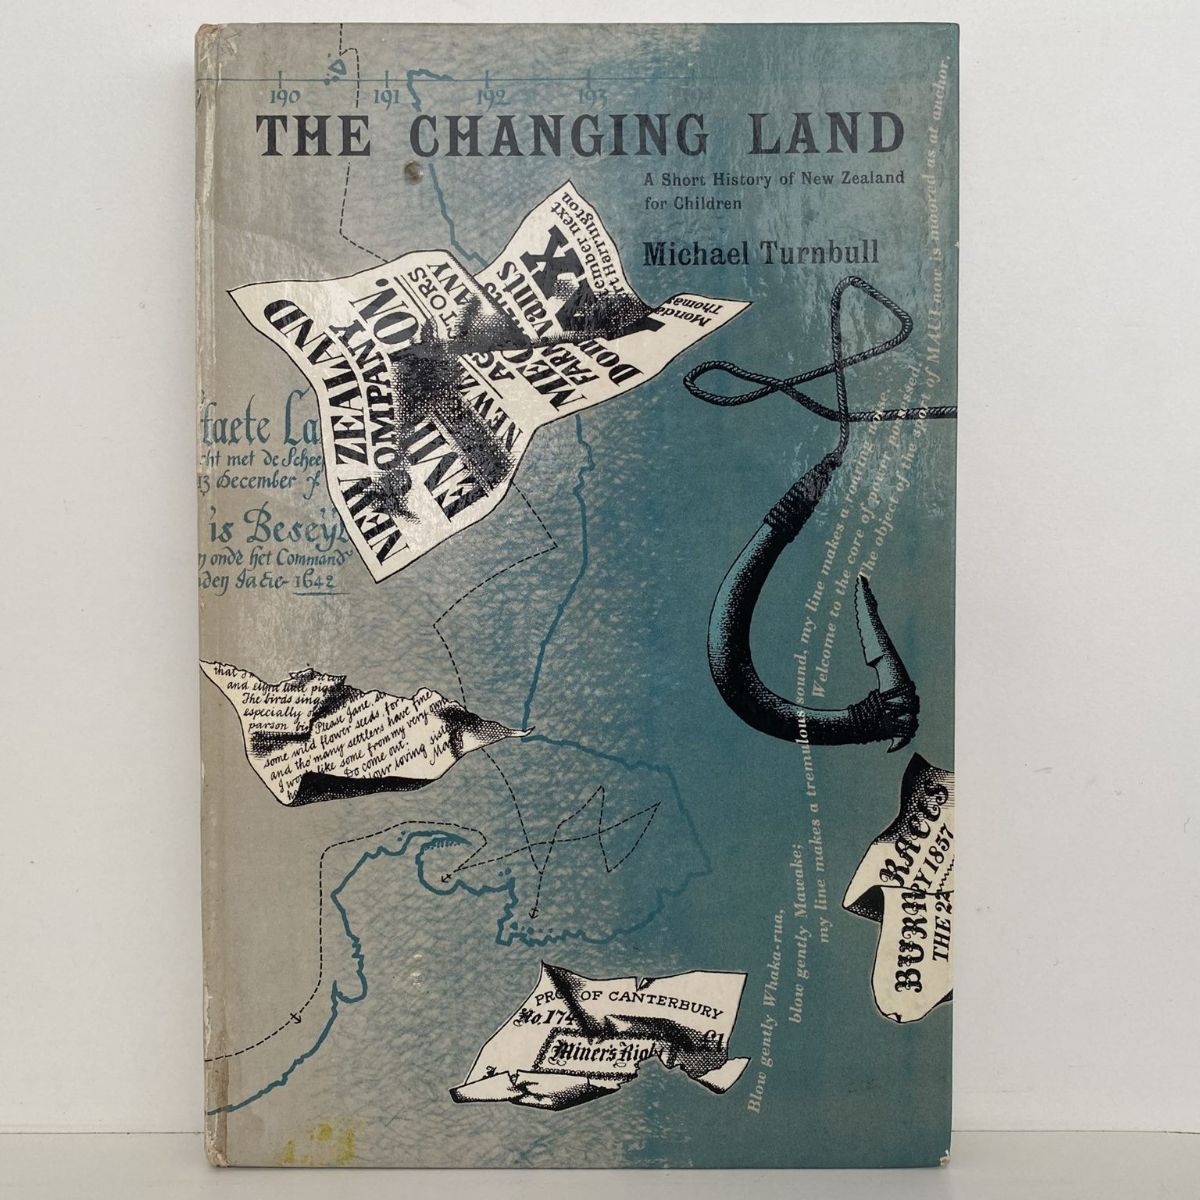 THE CHANGING LAND: A Short History of New Zealand for Children